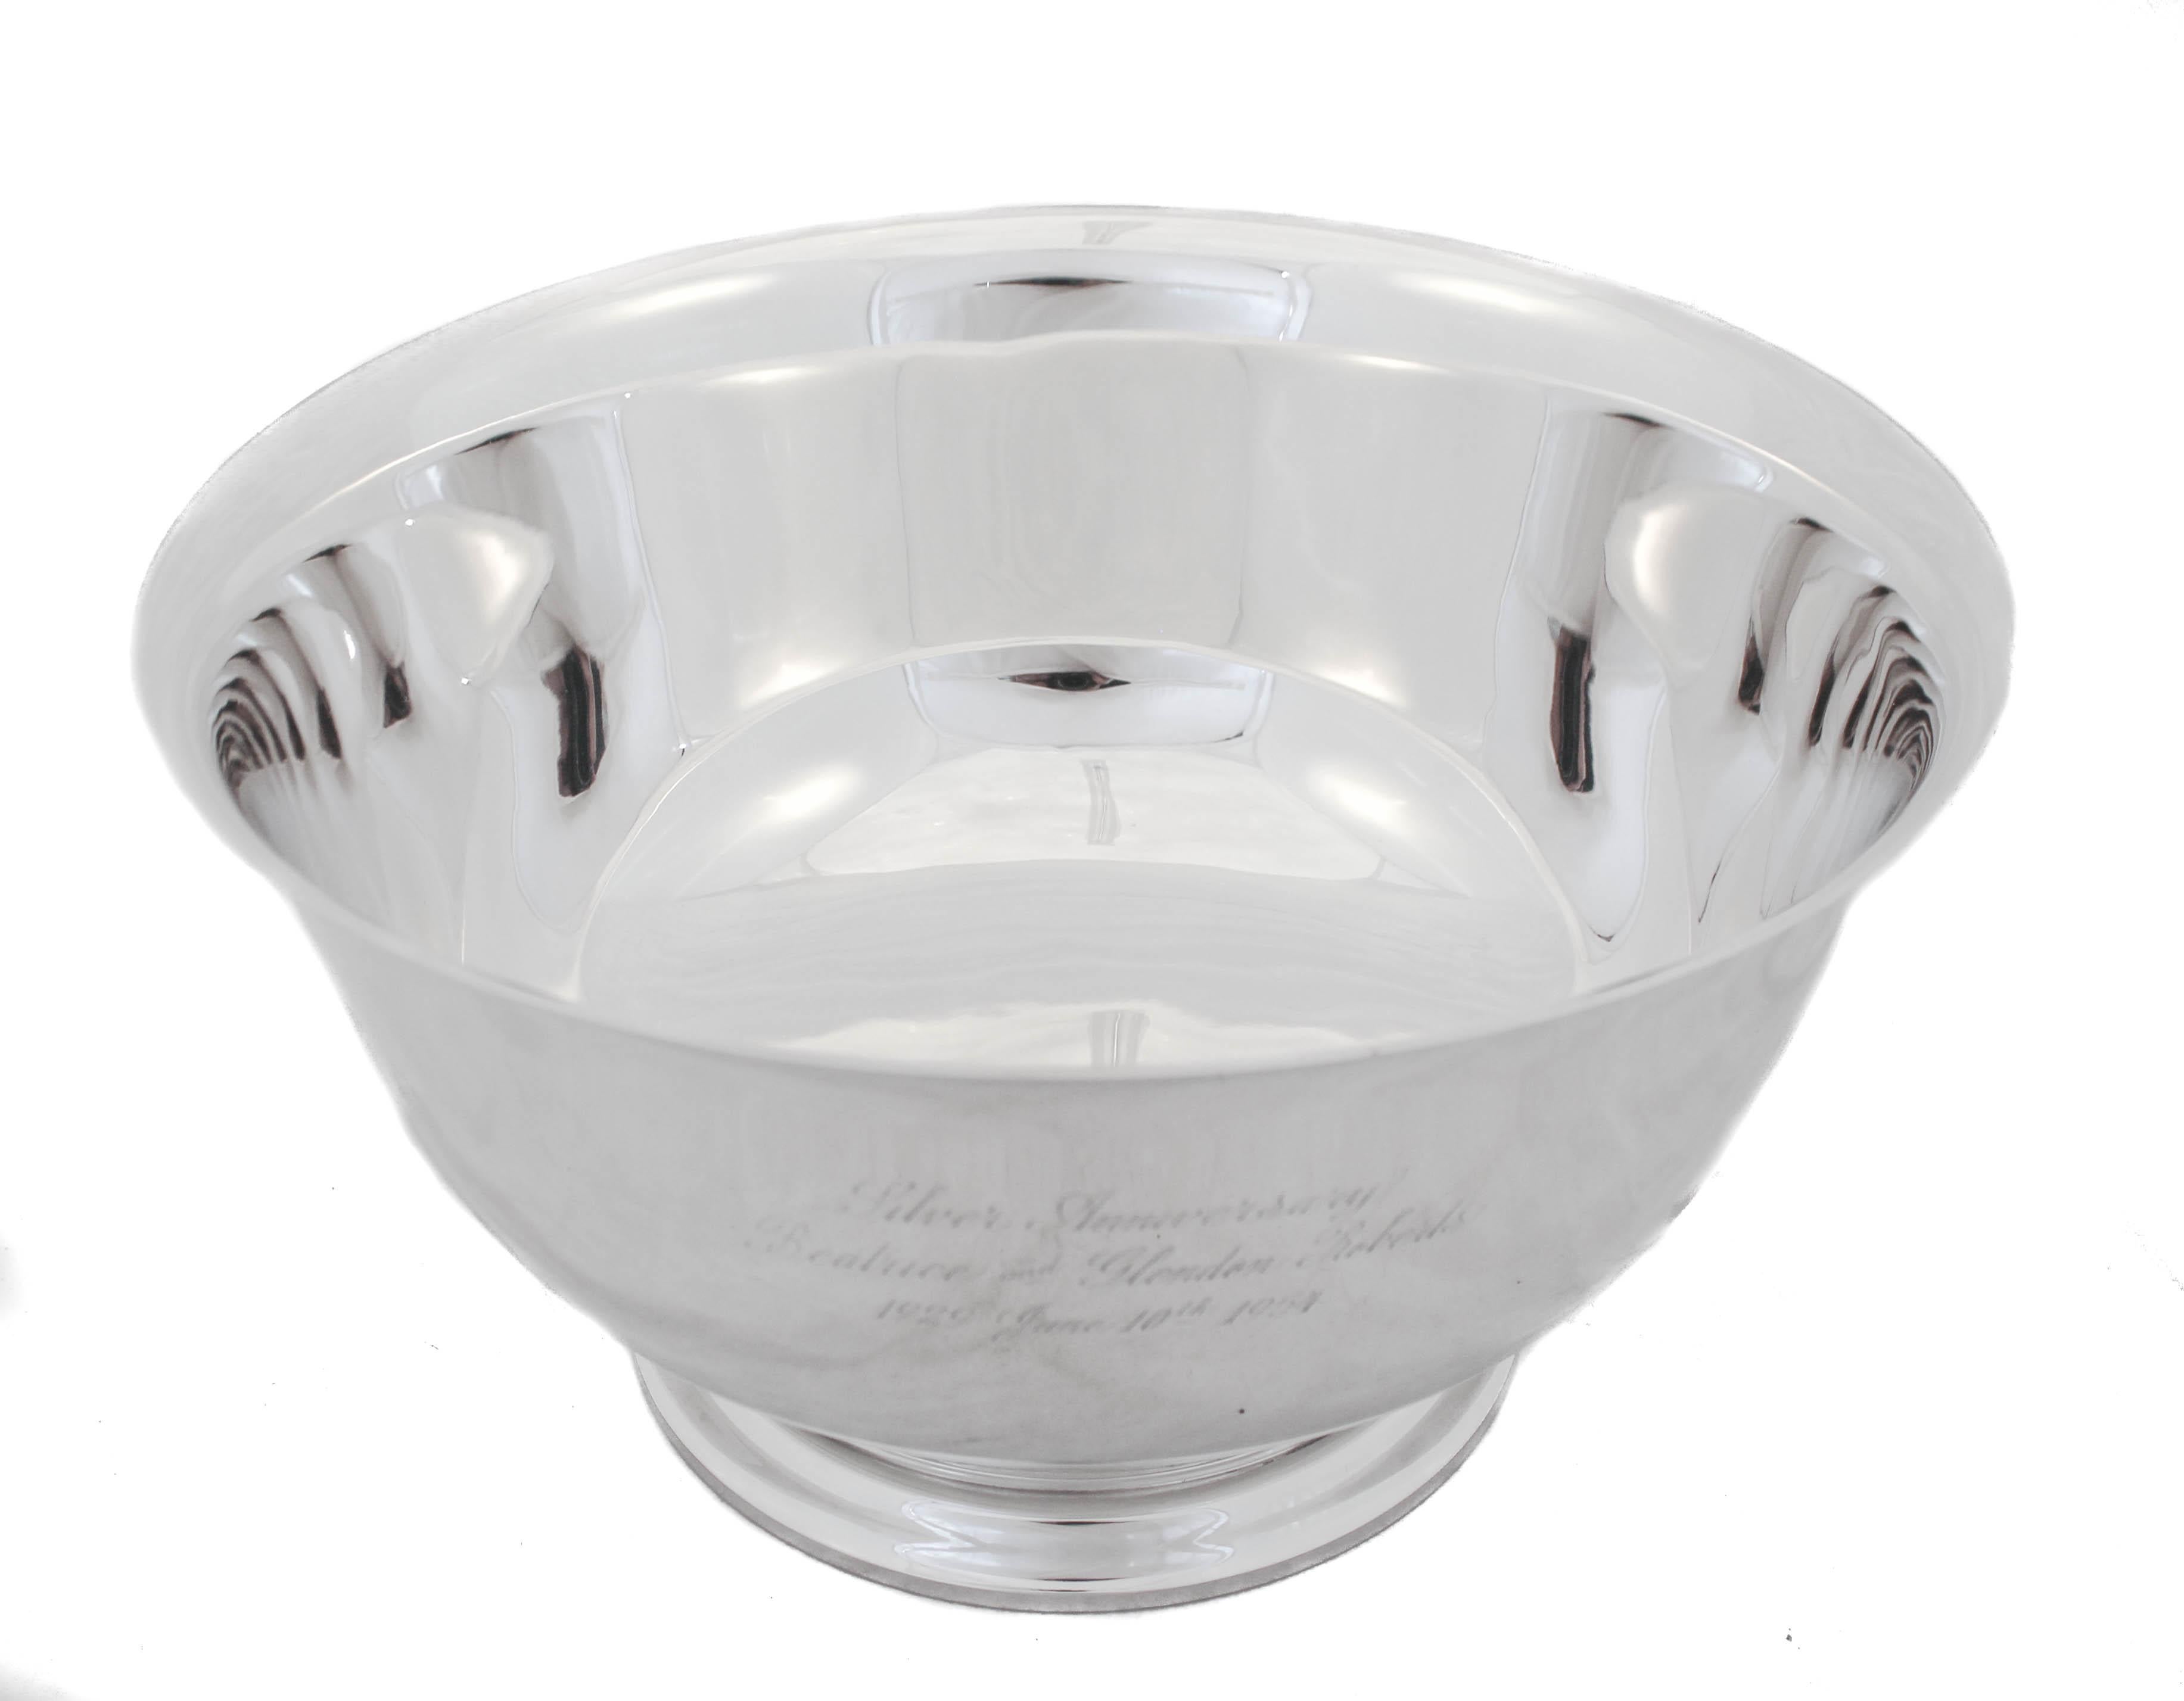 We are proud to offer you this sterling silver punch bowl by Gorham Silversmiths of Providence, Rhode Island dated 1953. Simply put, it’s HUGE! Elegant and chic it’s the epitome of Mid-Century modern silver. No decoration, etchings or design; just a